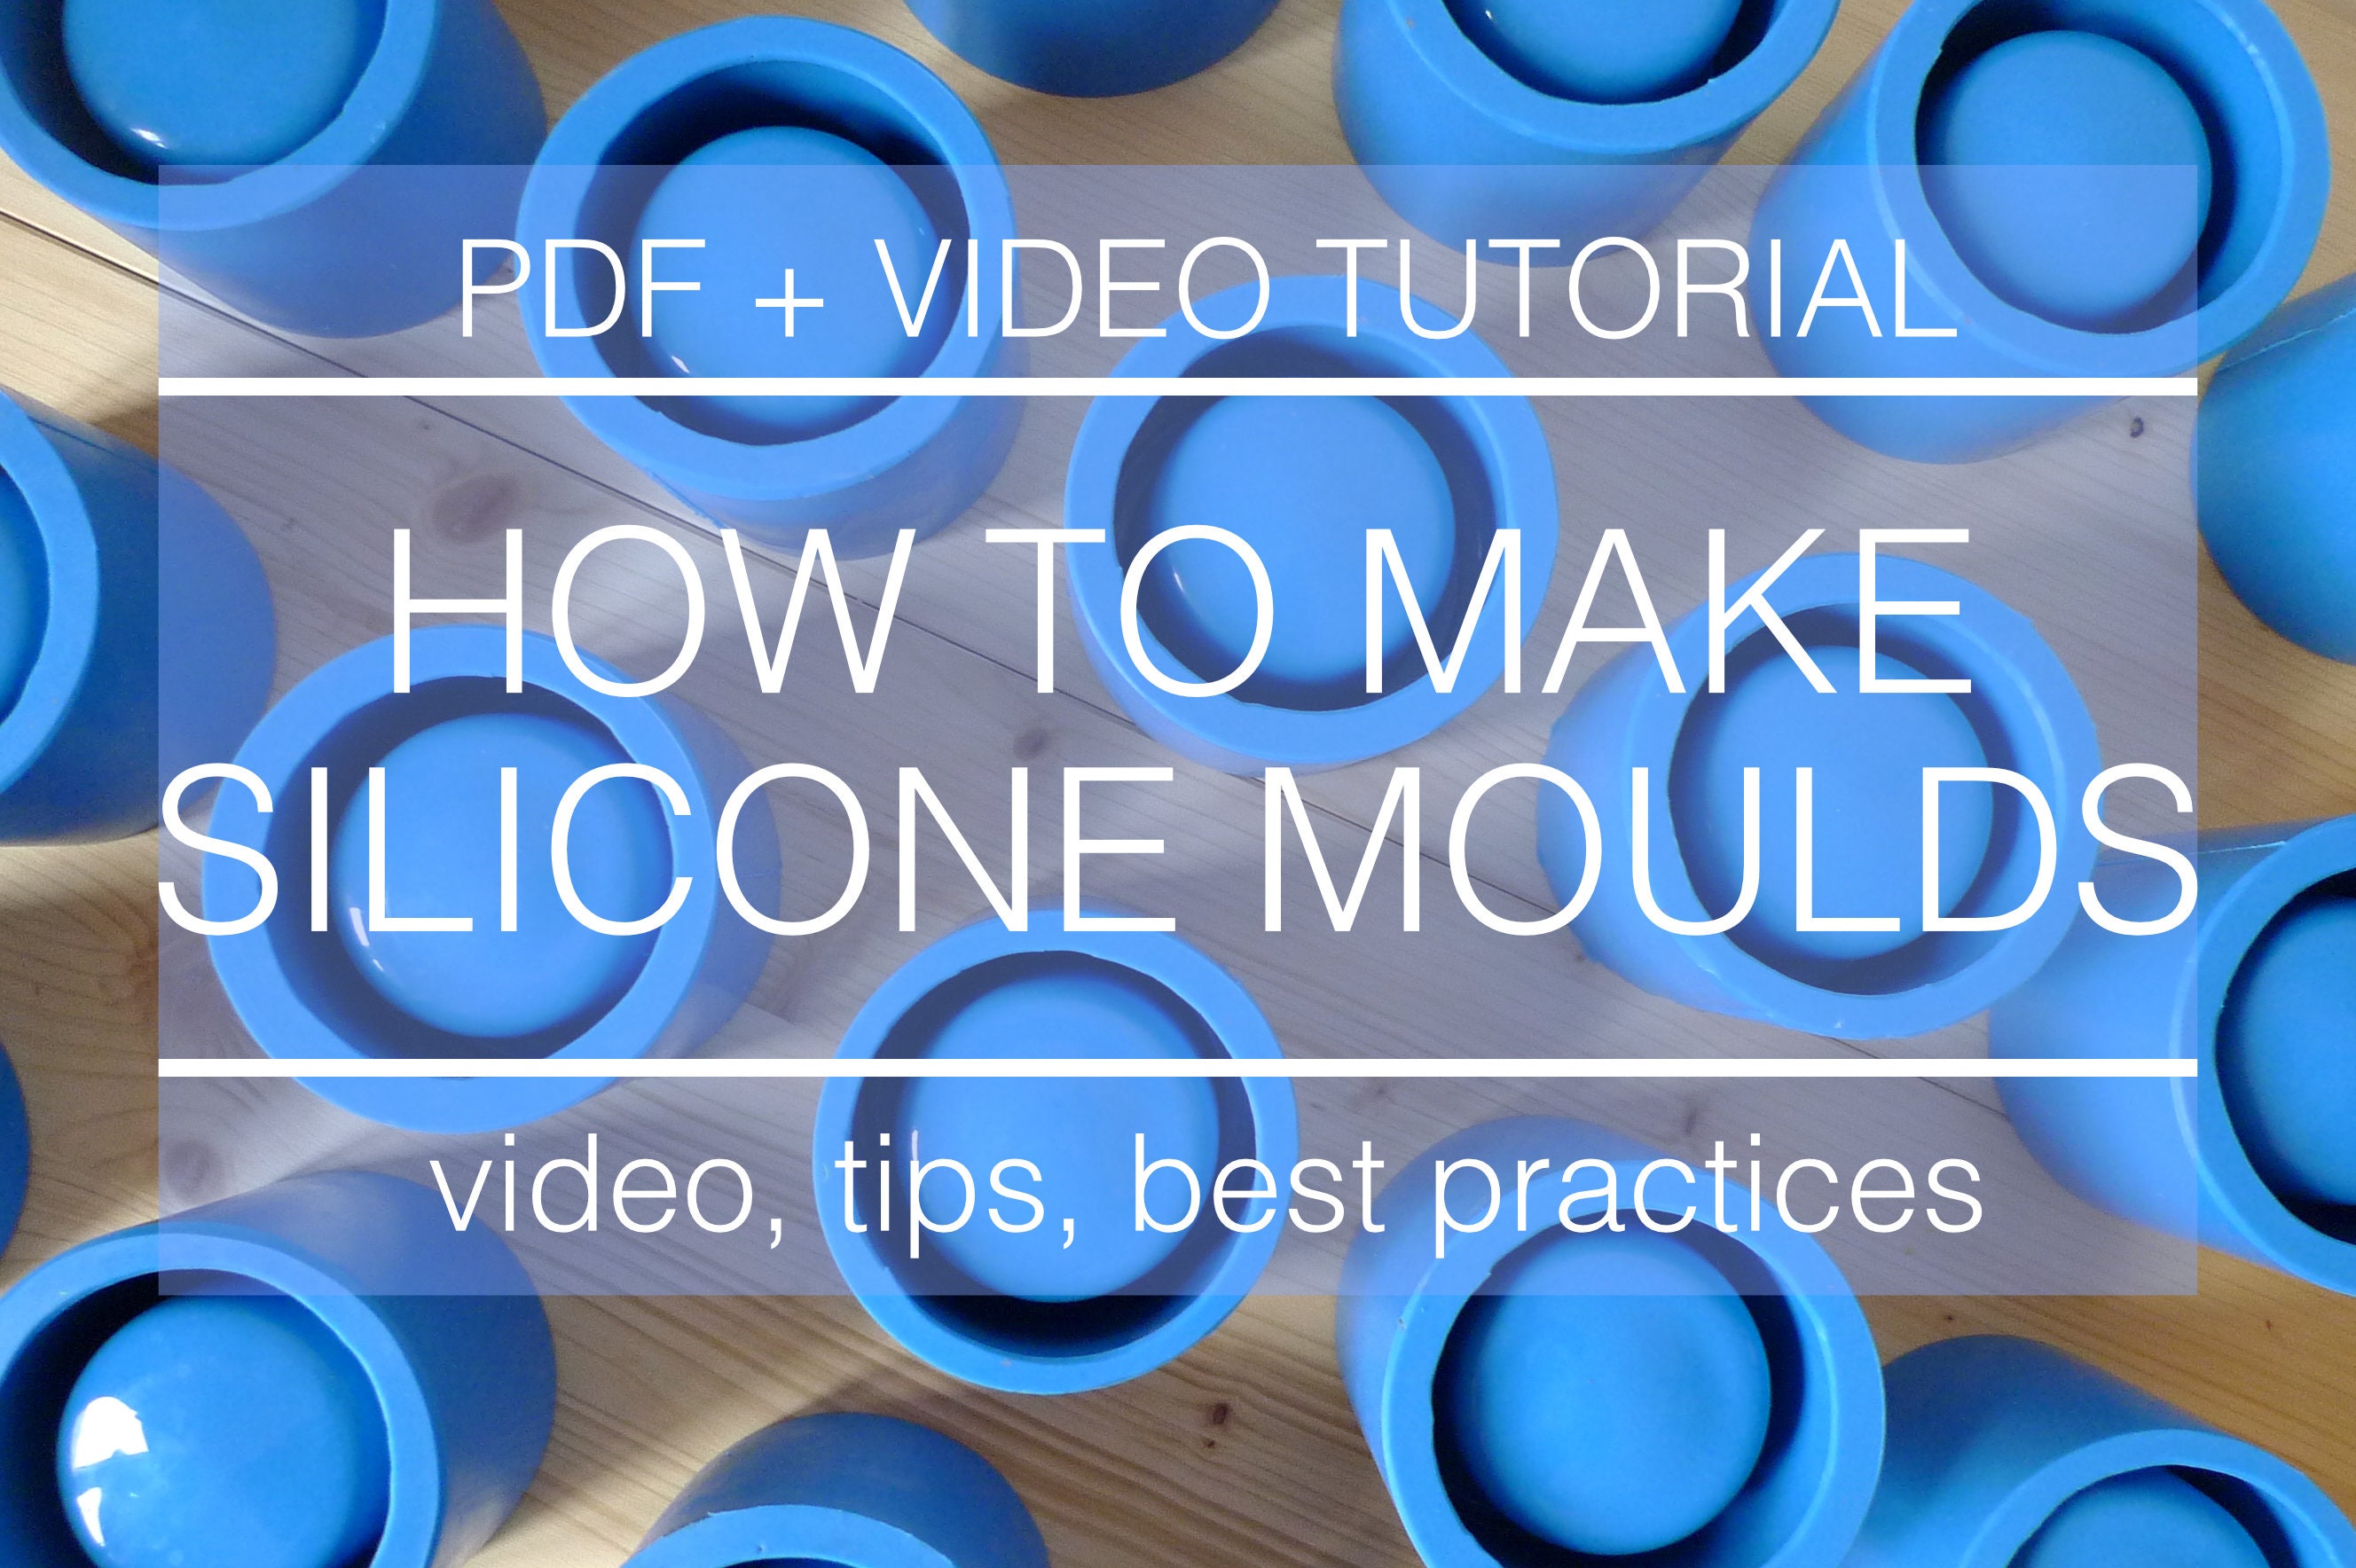 Silicone Mold Making Tutorial - How To DIY Resin Molds 